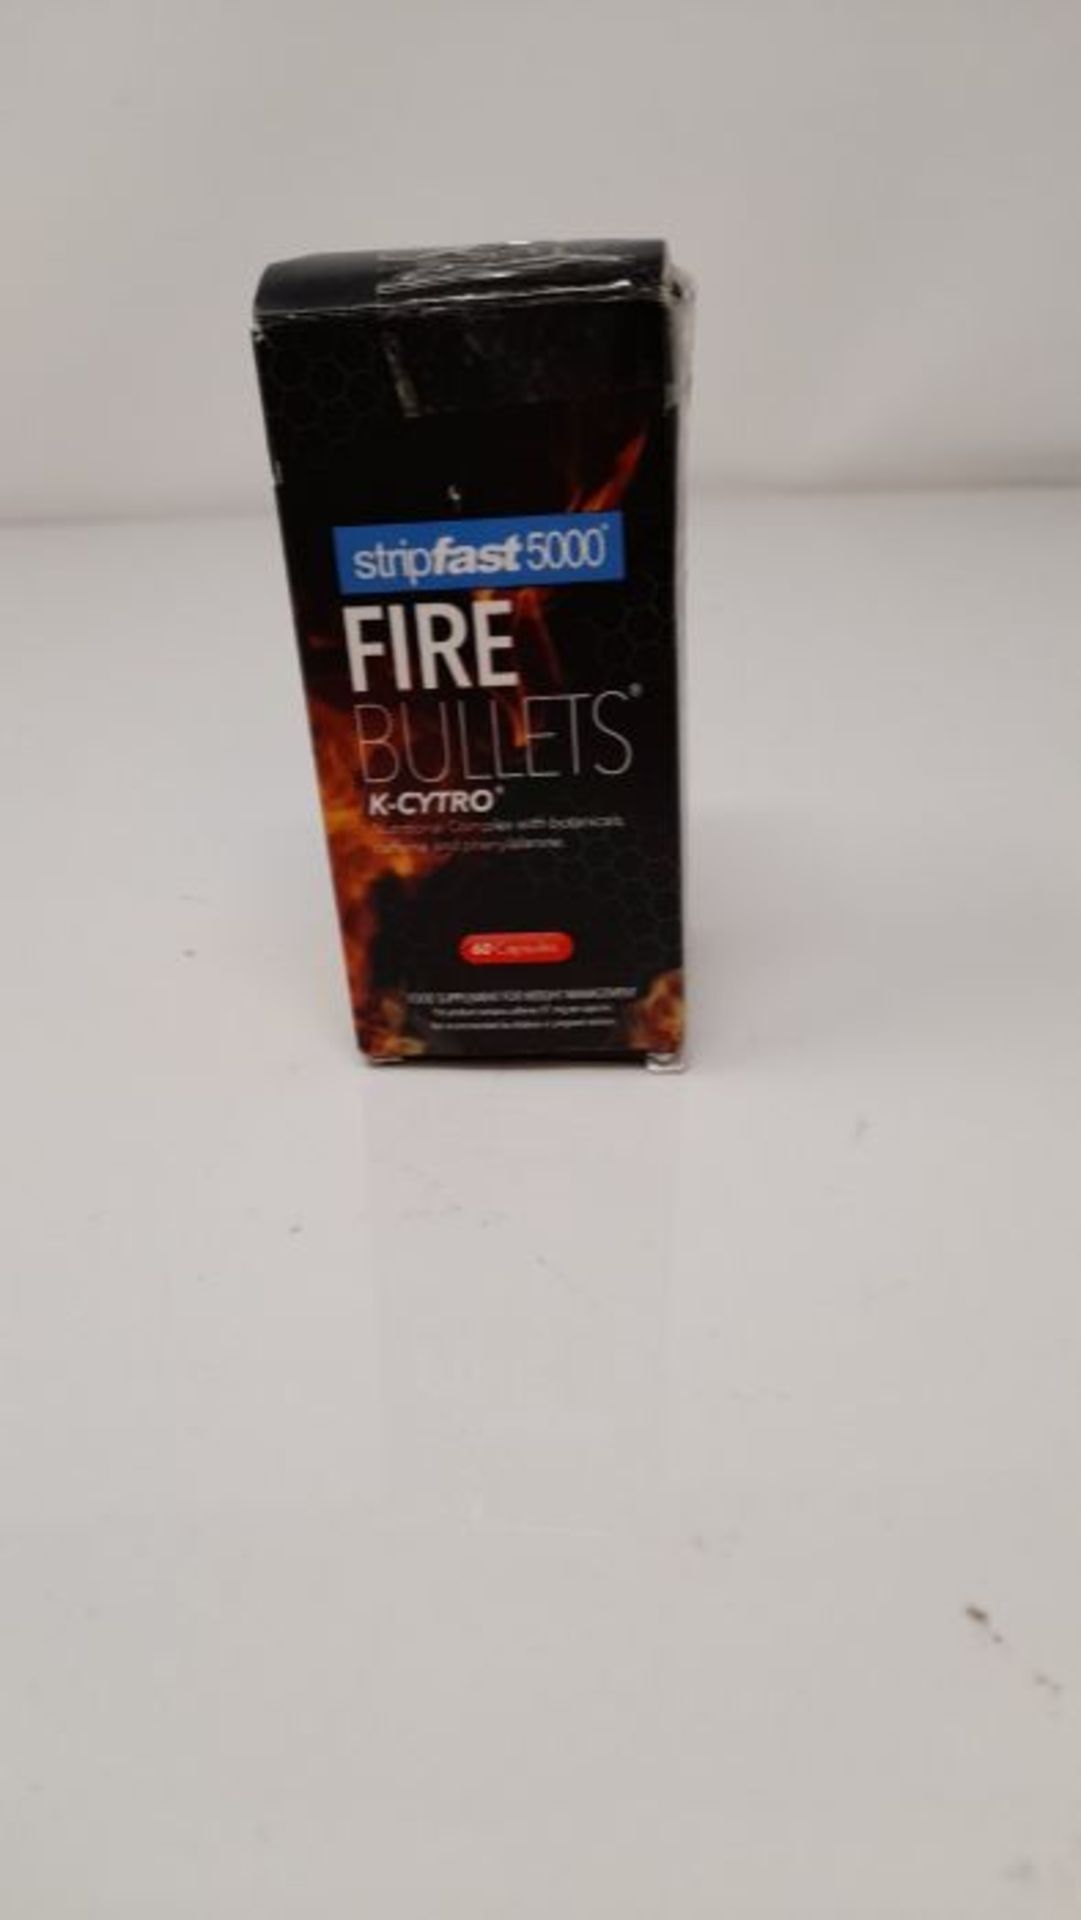 FIRE Bullets with K-CYTRO for Women & Men, Weight Management Supplement, 30 Days Suppl